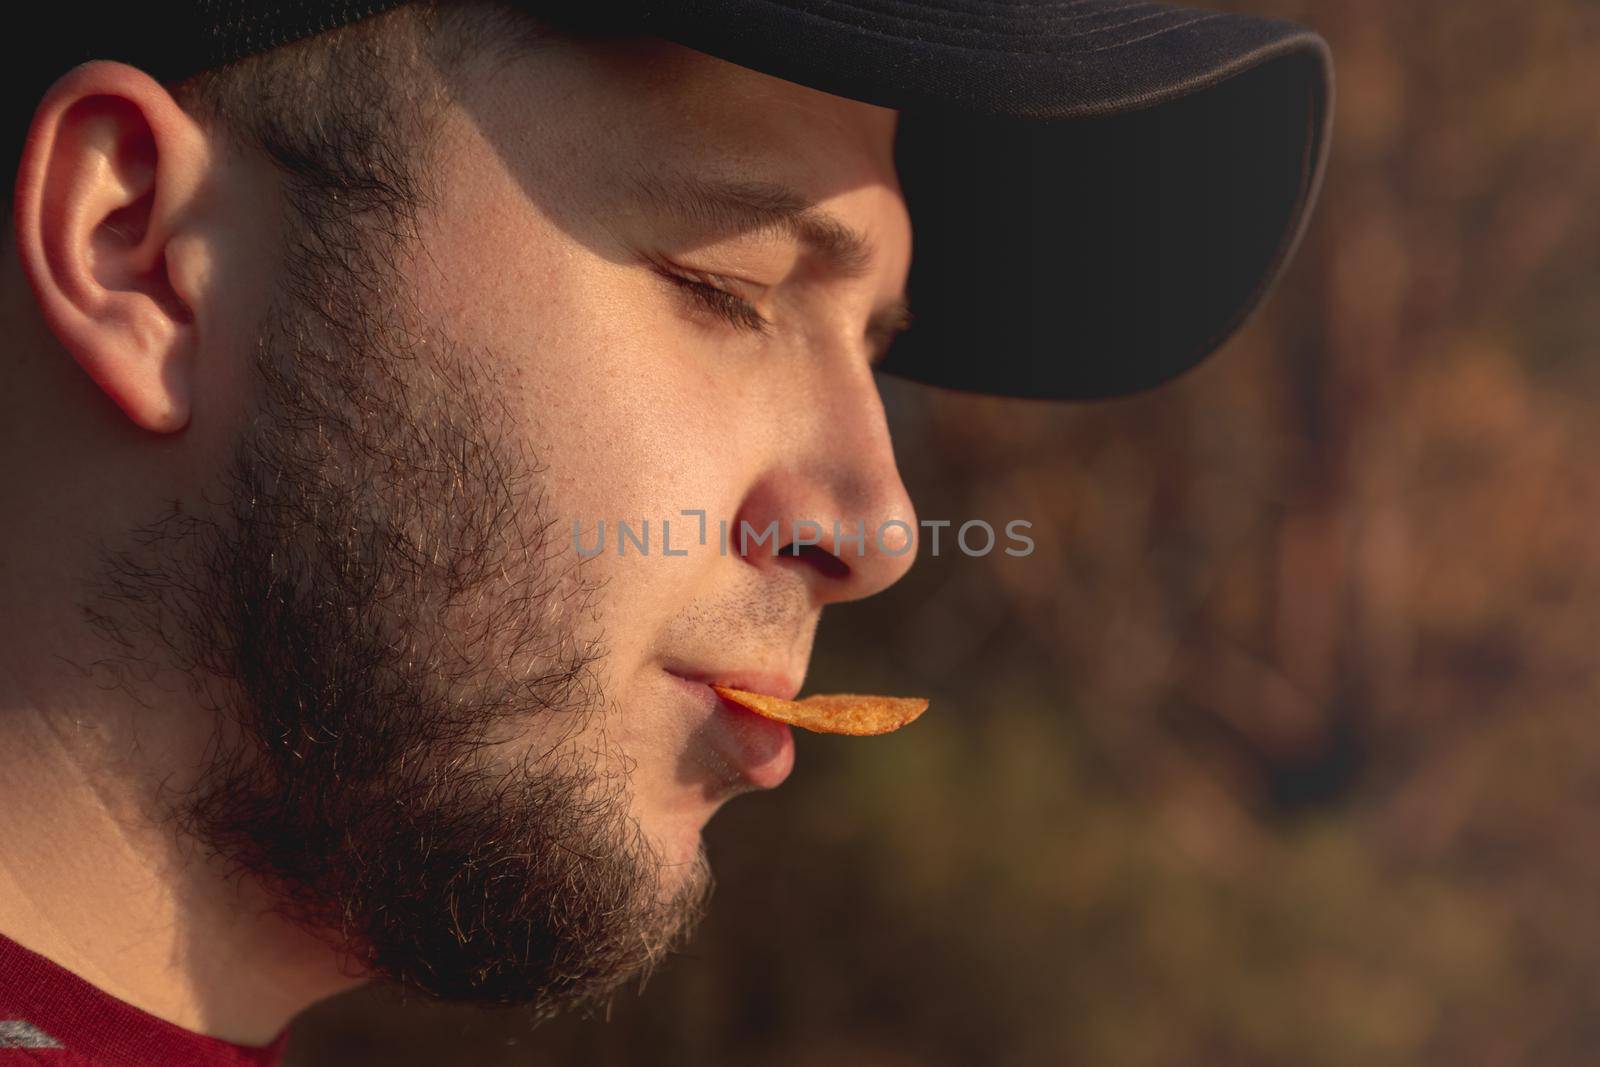 Bearder Man in forest eating chips. In park image outdoors with blurred background.